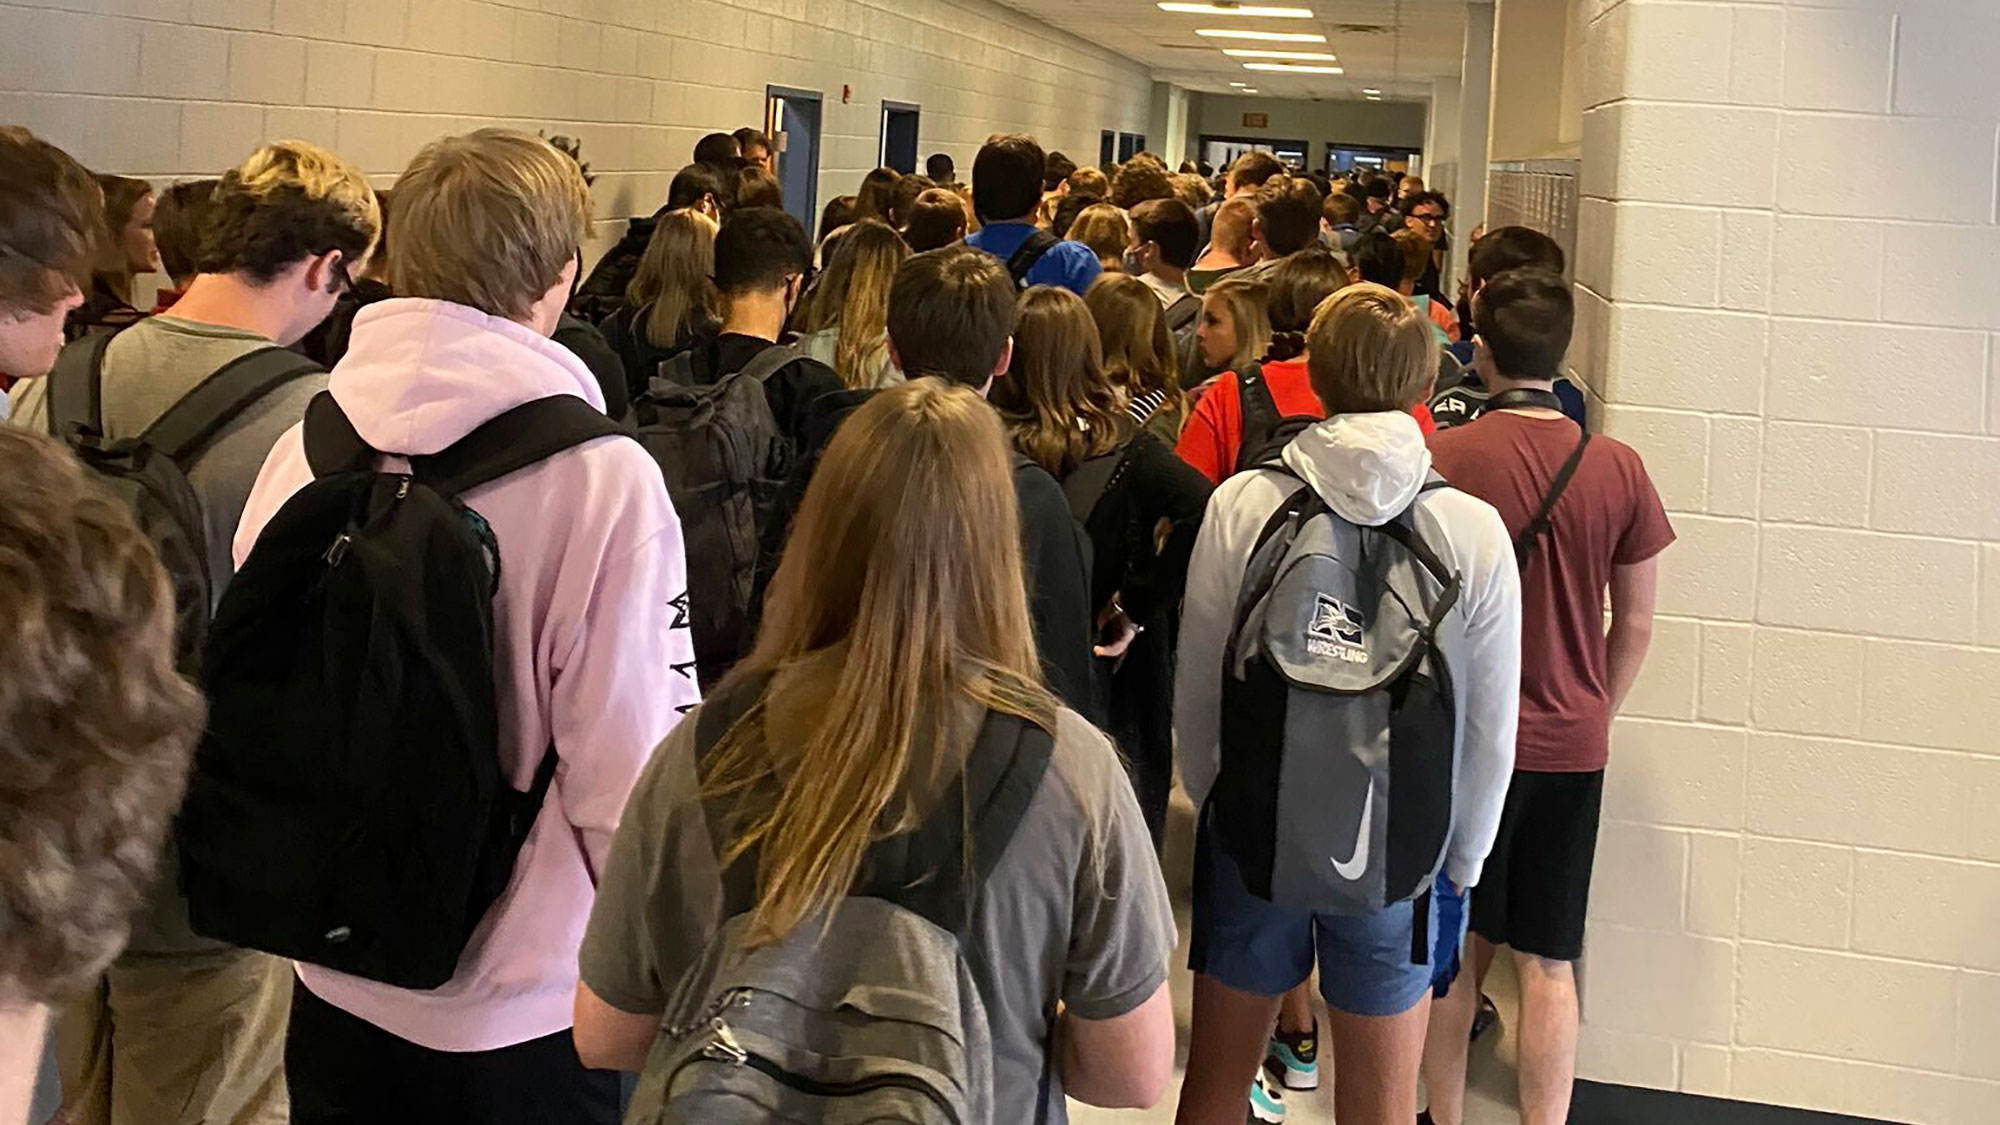 In this photo posted on Twitter by Hannah Watters, students crowd a hallway at North Paulding High School on August 4.